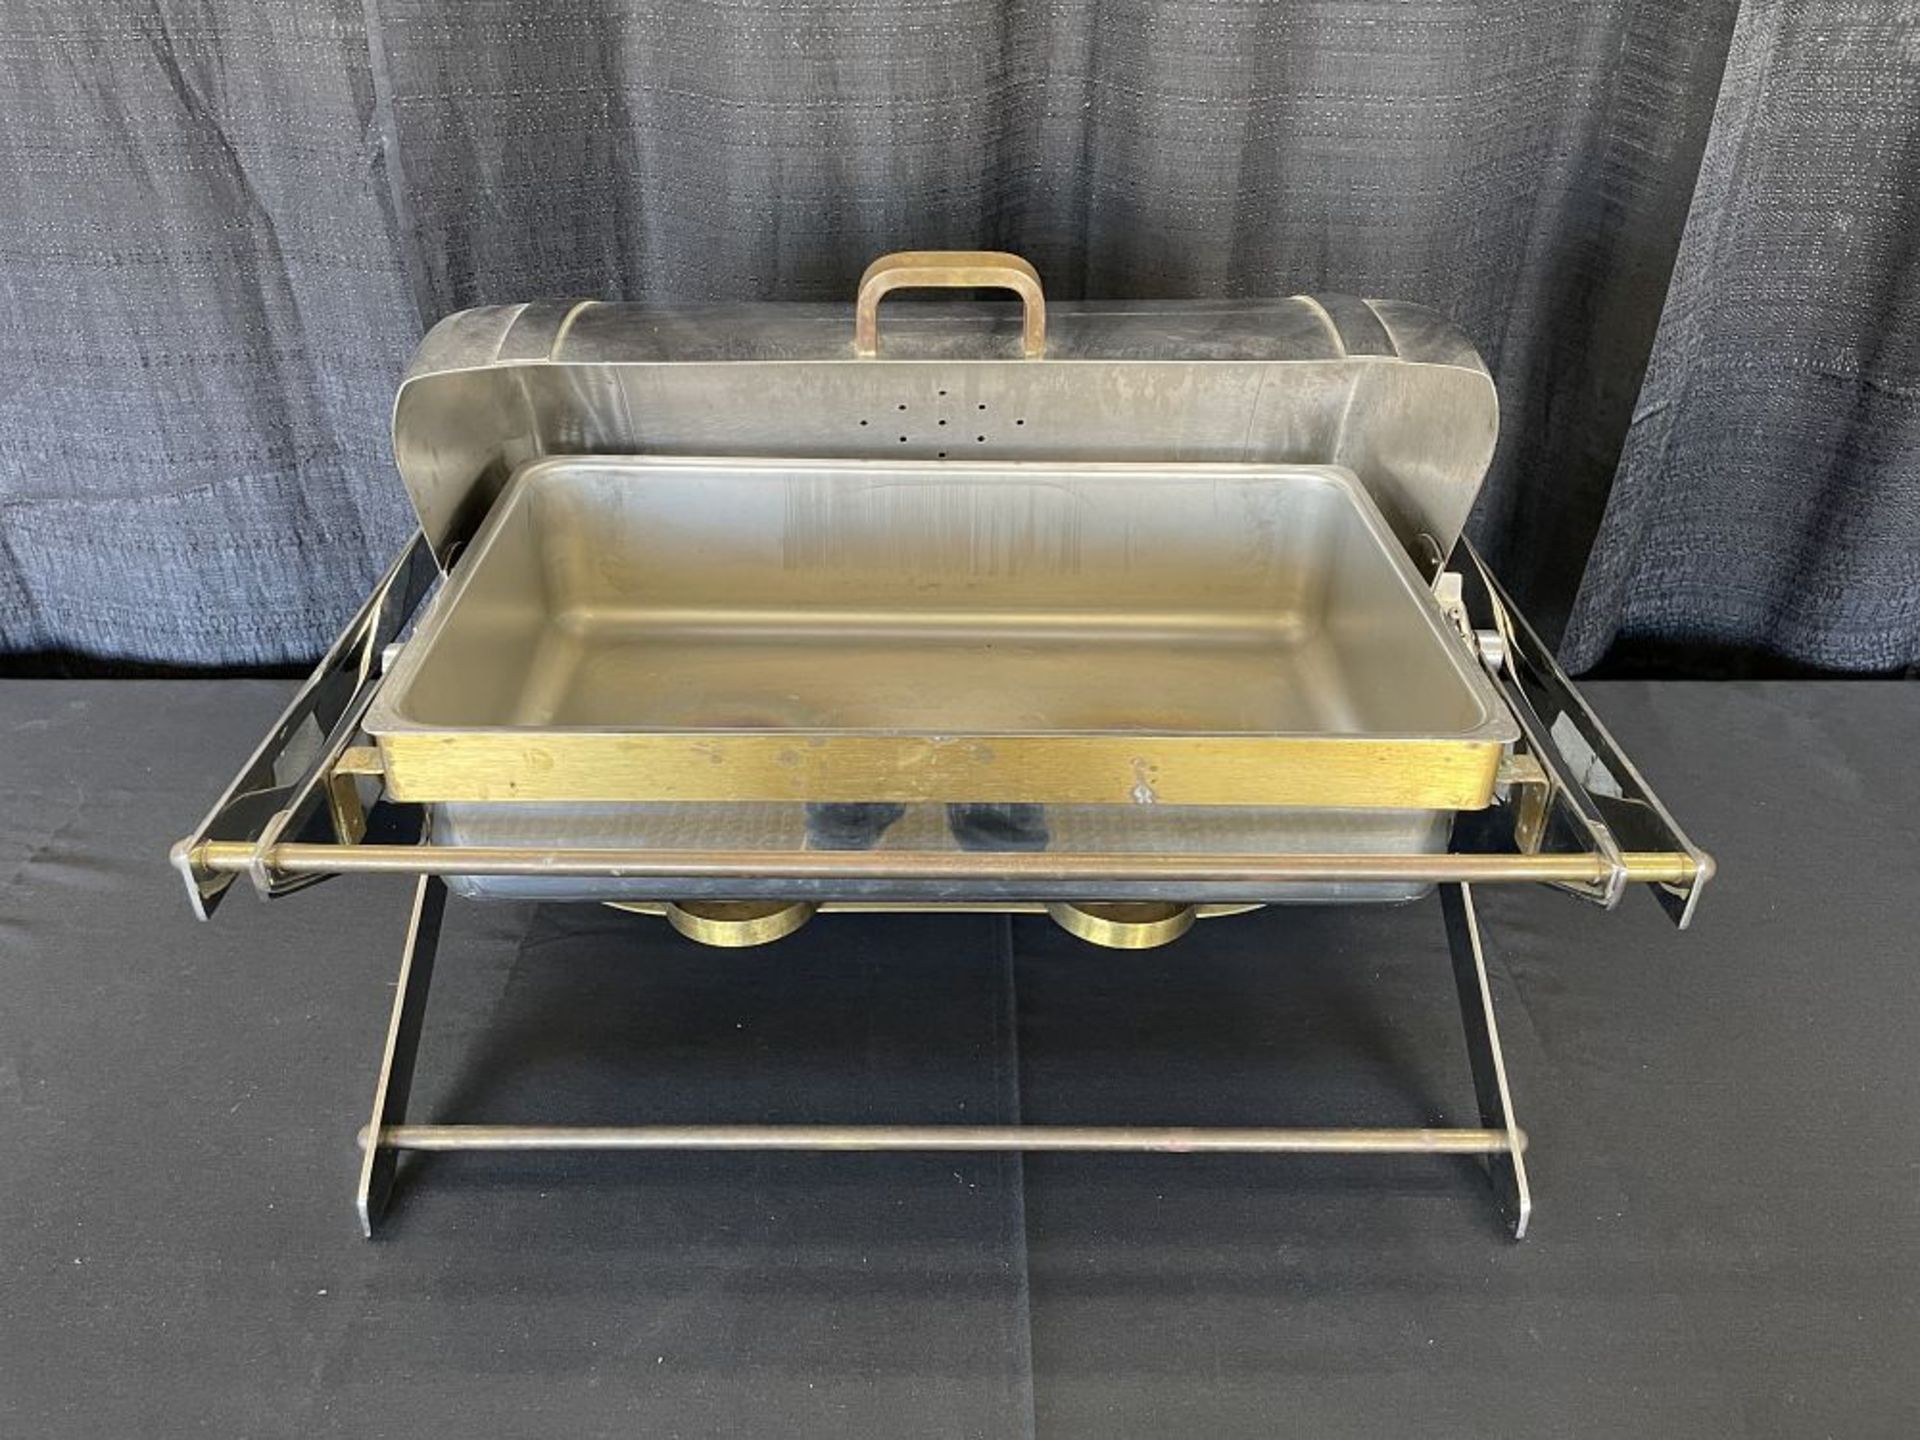 8 qt. Roll-Top Chafer w/ Brass Accent - Image 2 of 2